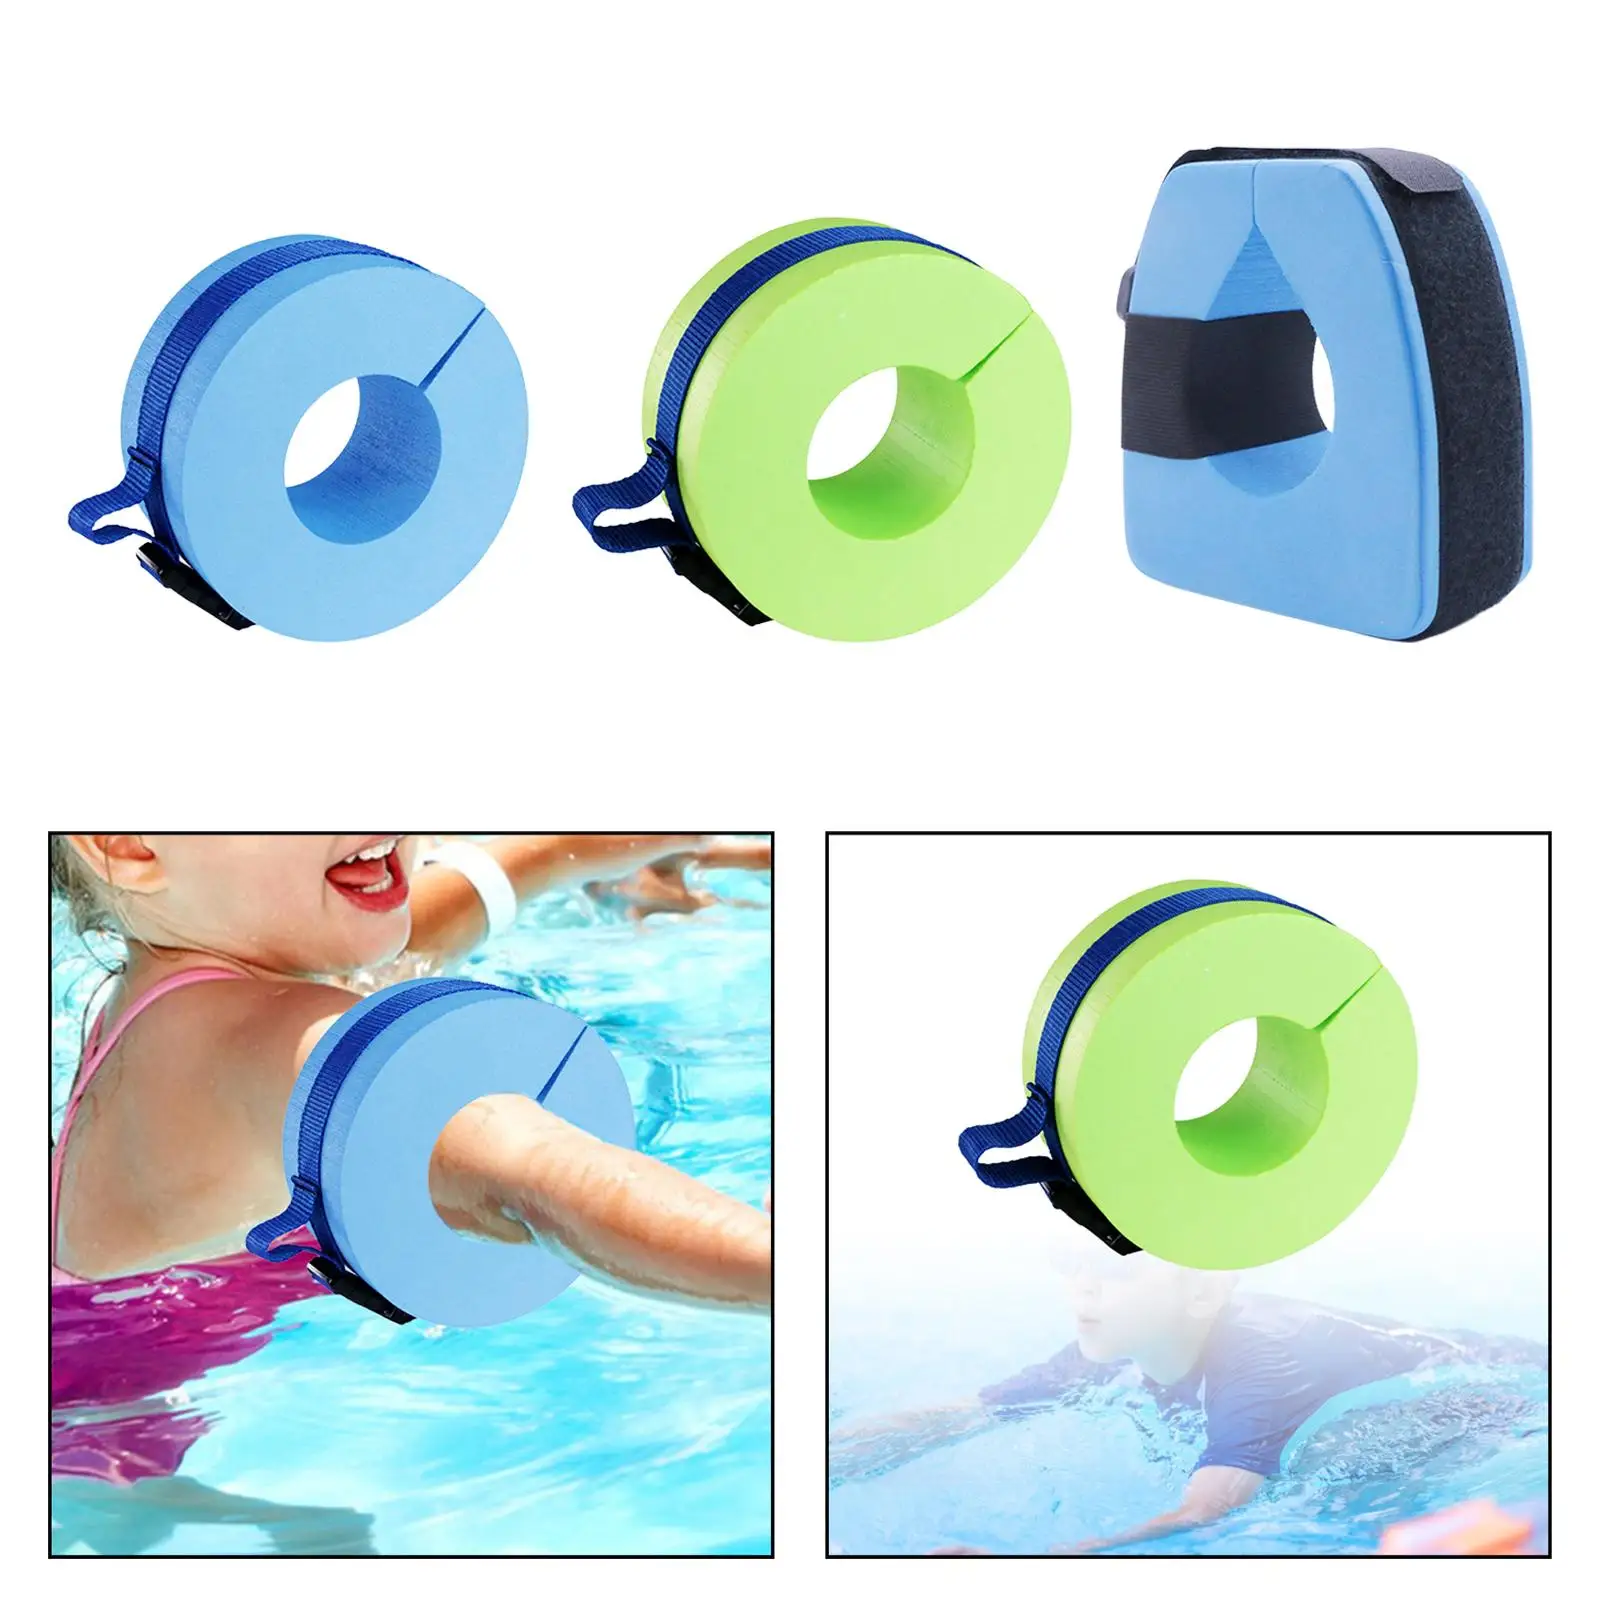 Swim Aquatic Cuffs Swimming Arm Bands with Quick Release Buckle Children and Adults Swim Arm Band for Swim Training